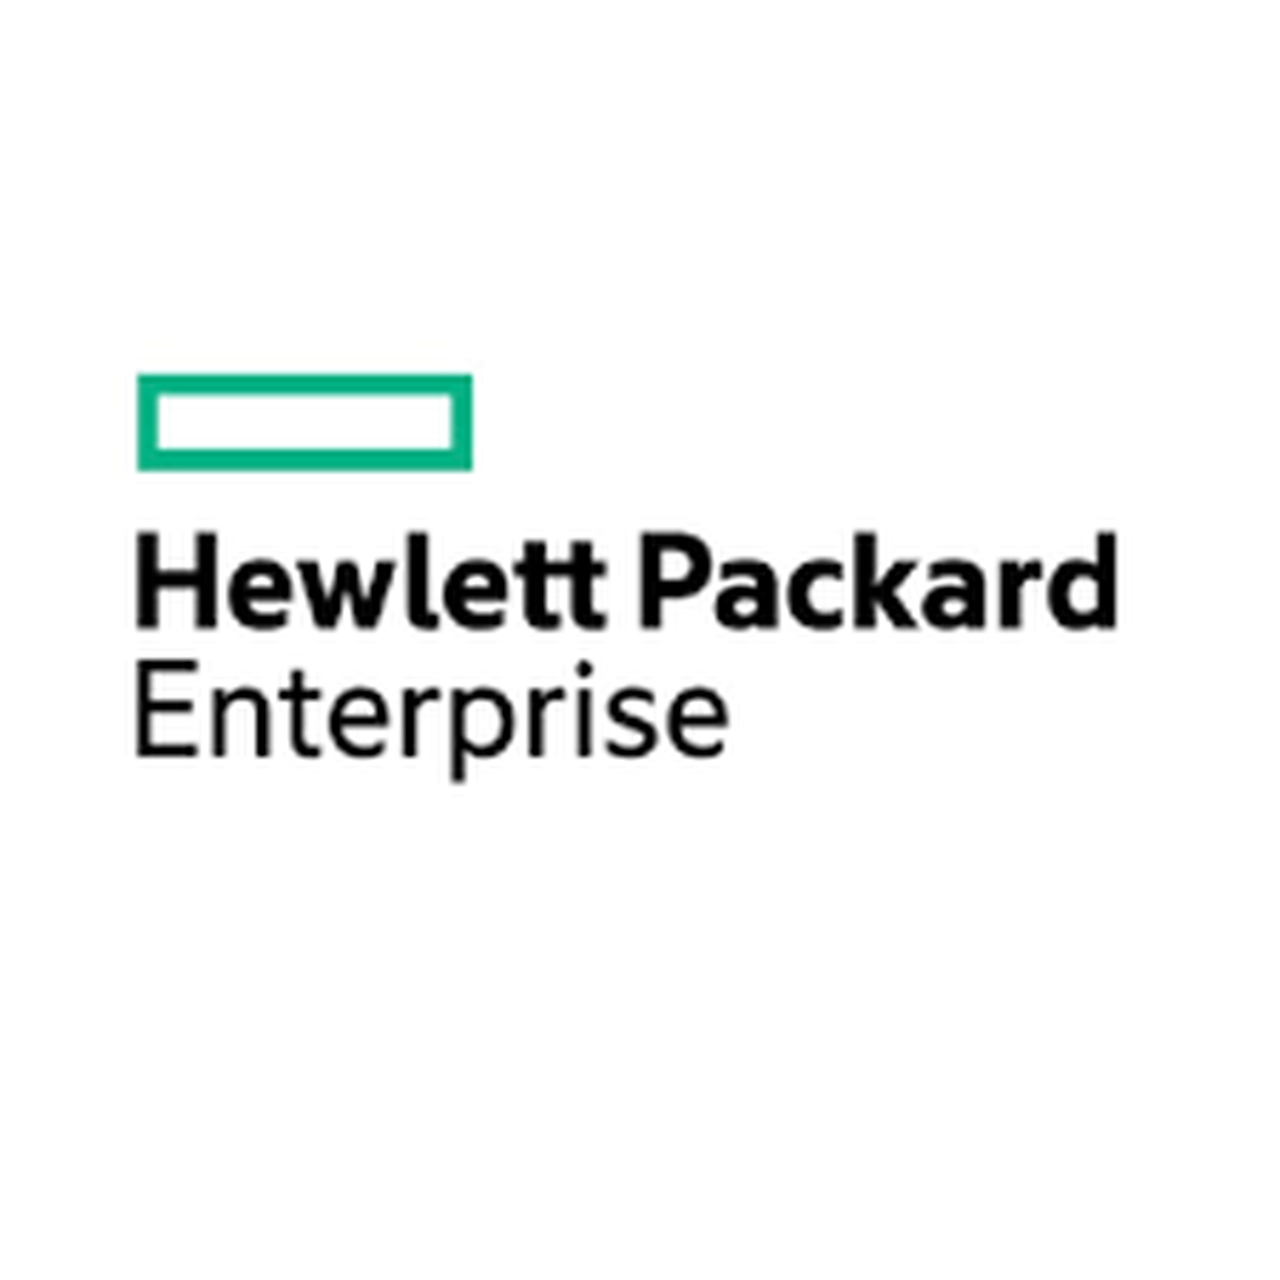 HPE 1420 8G PoE+ (64W) Switch South Africa - English localization